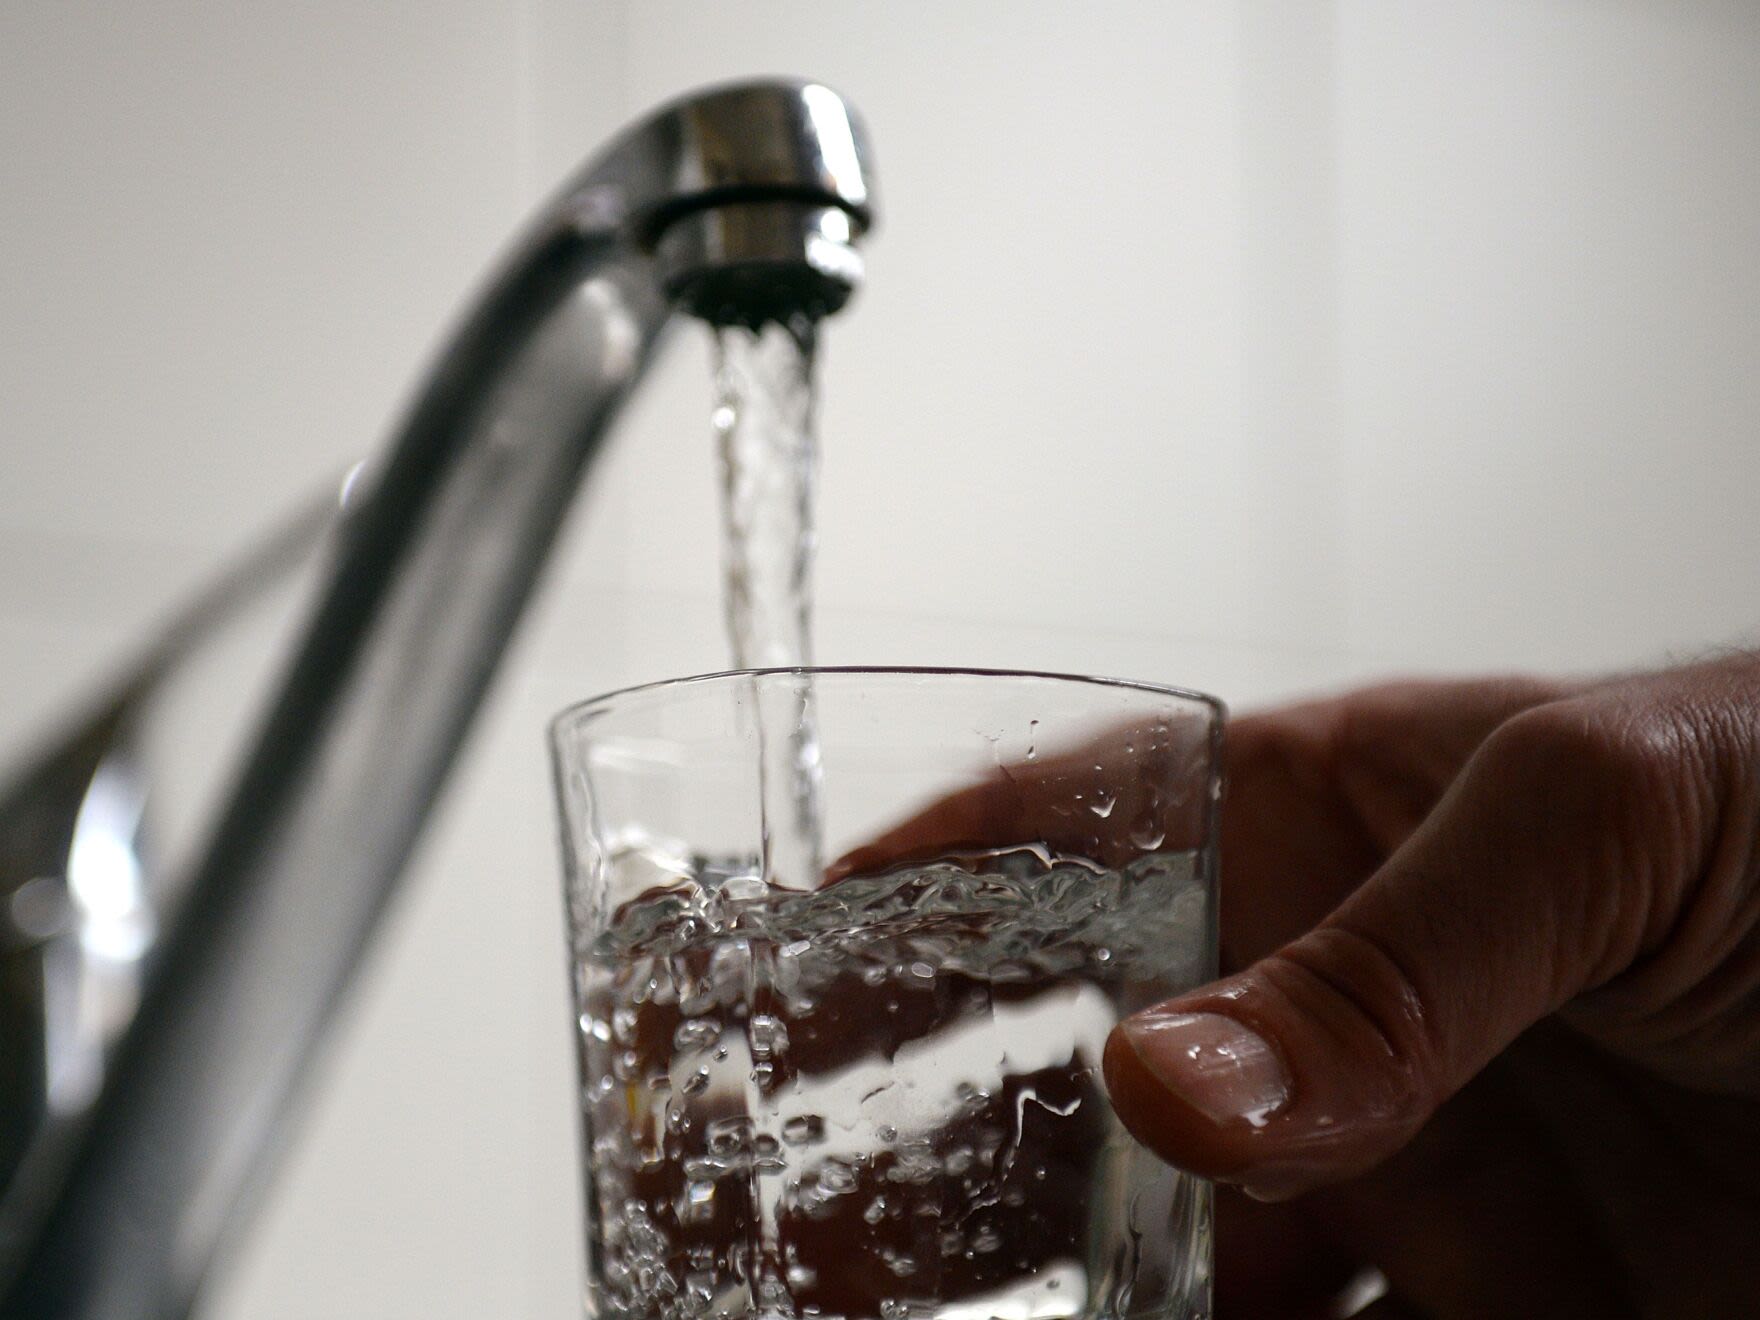 Capito Open To Renewal Of Water Bill Subsidy Program - West Virginia Public Broadcasting